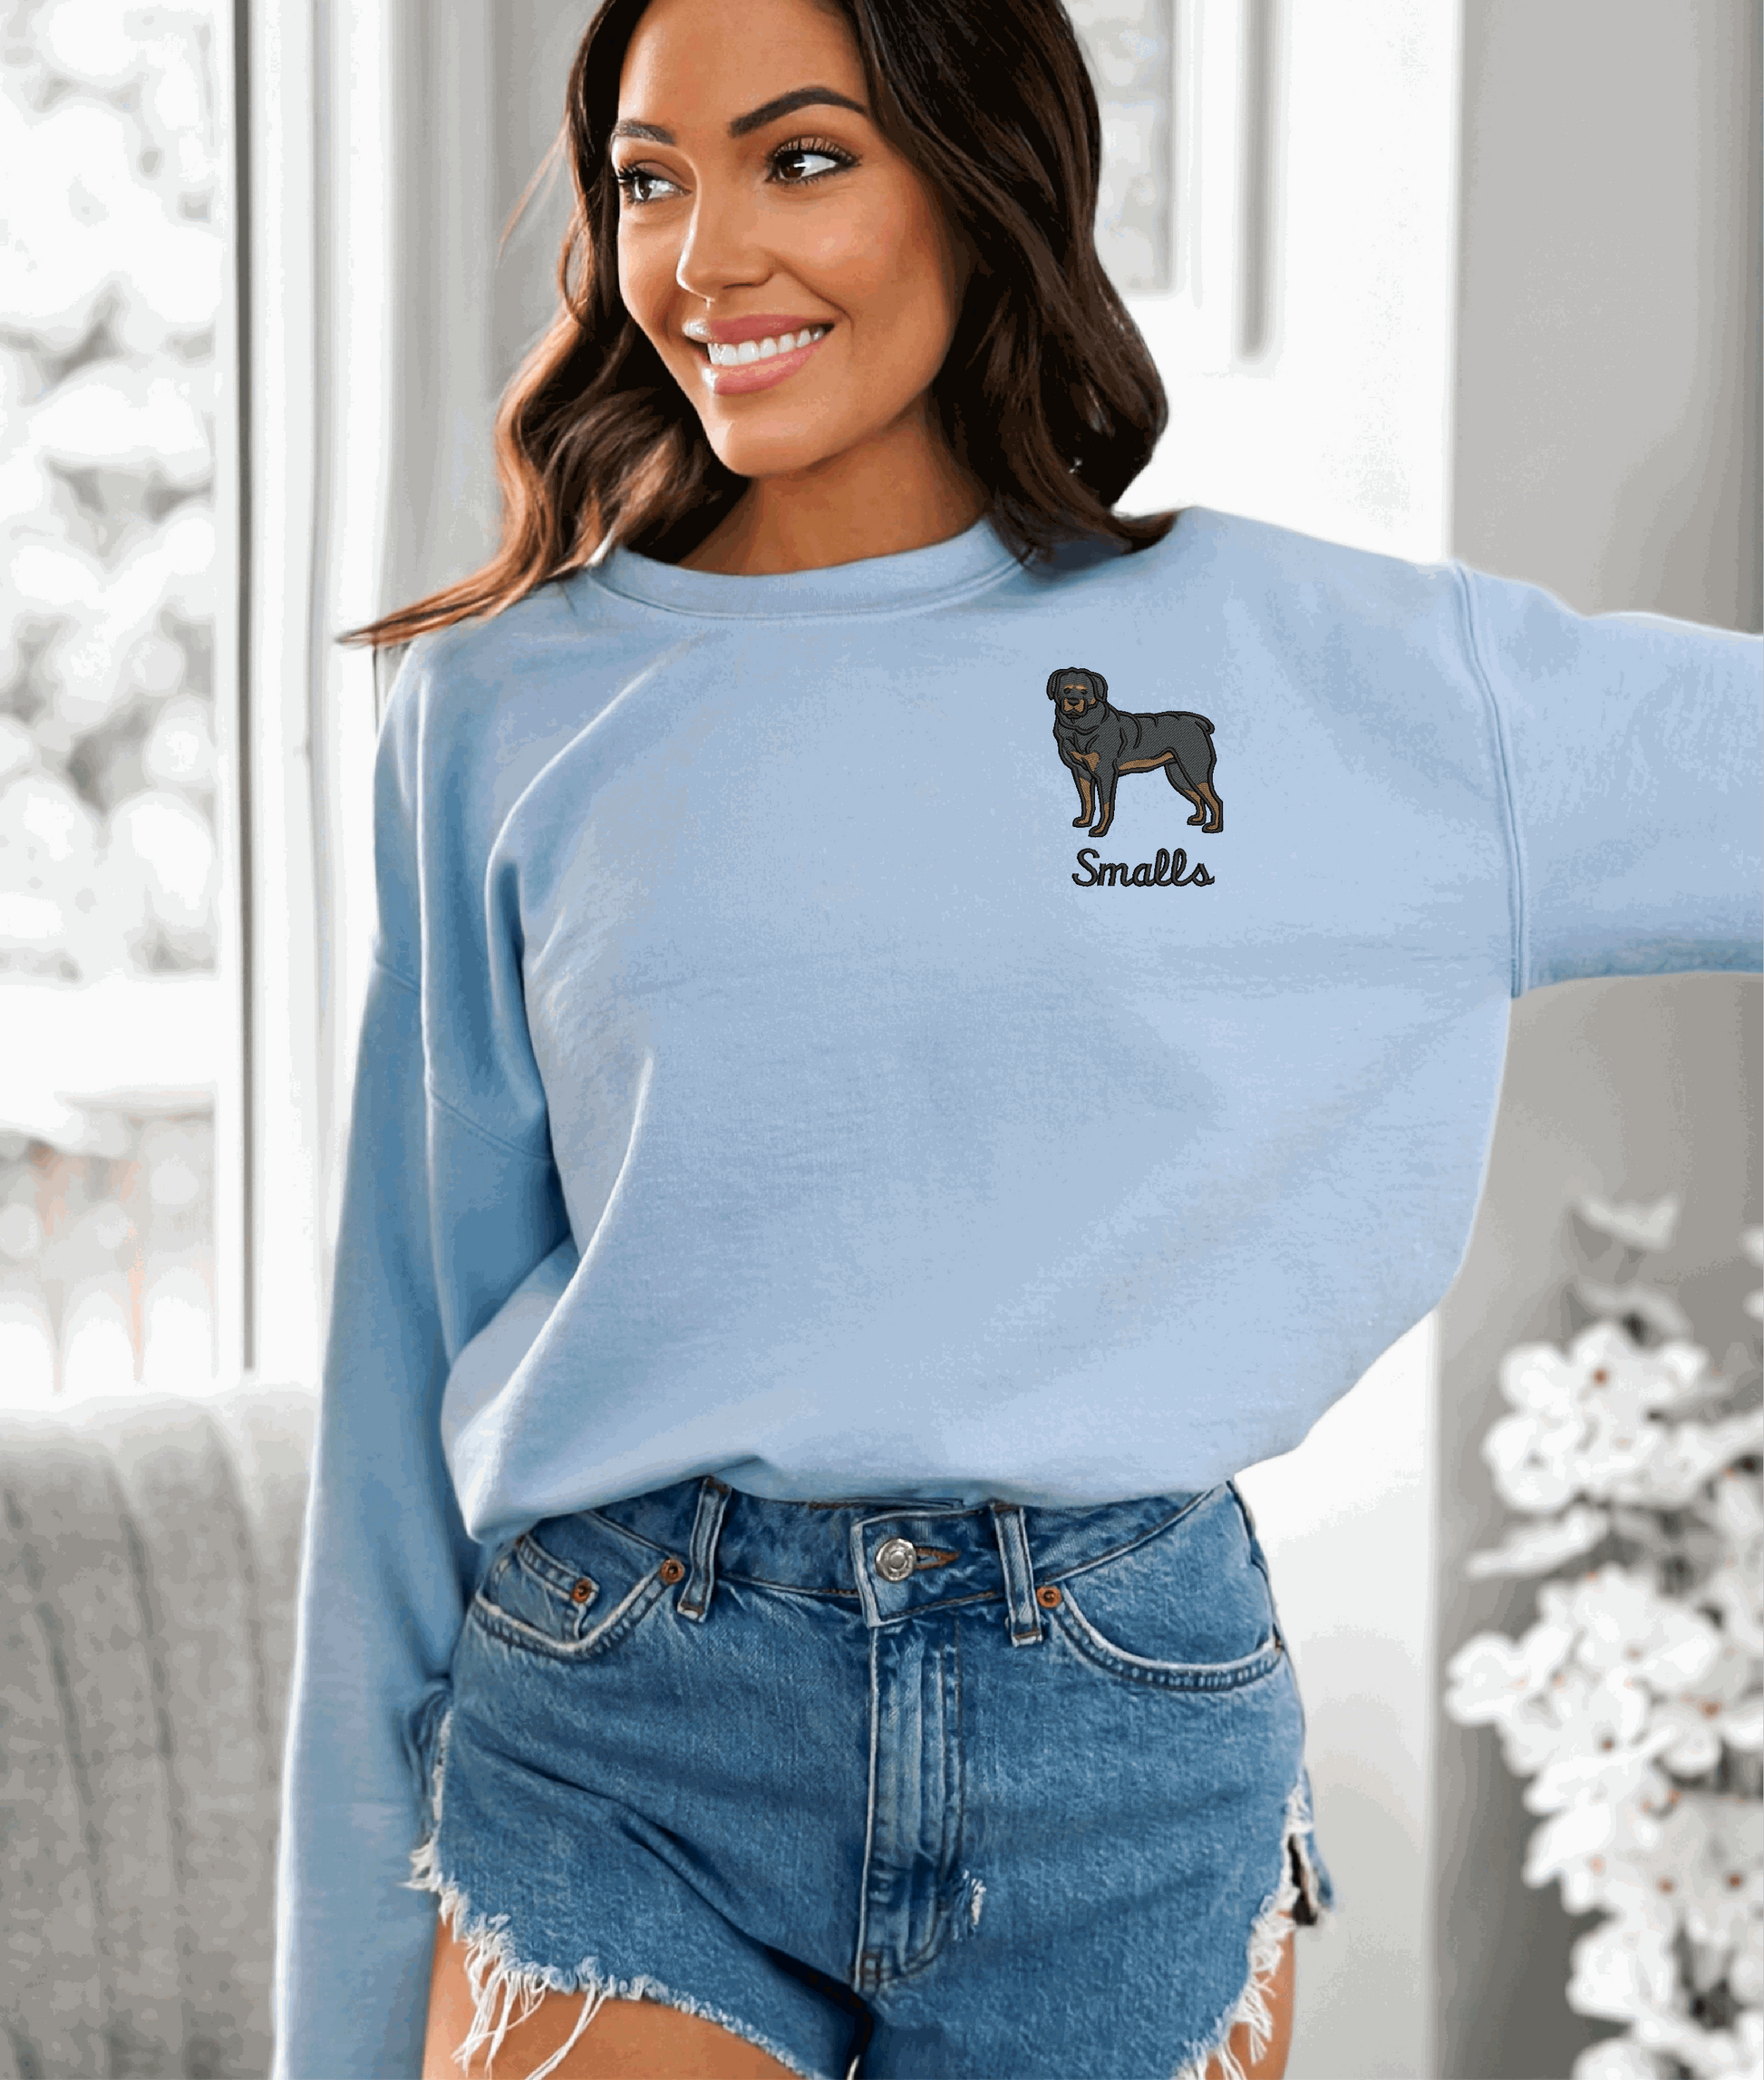 a woman wearing a light blue sweater with a dog embroidered on it